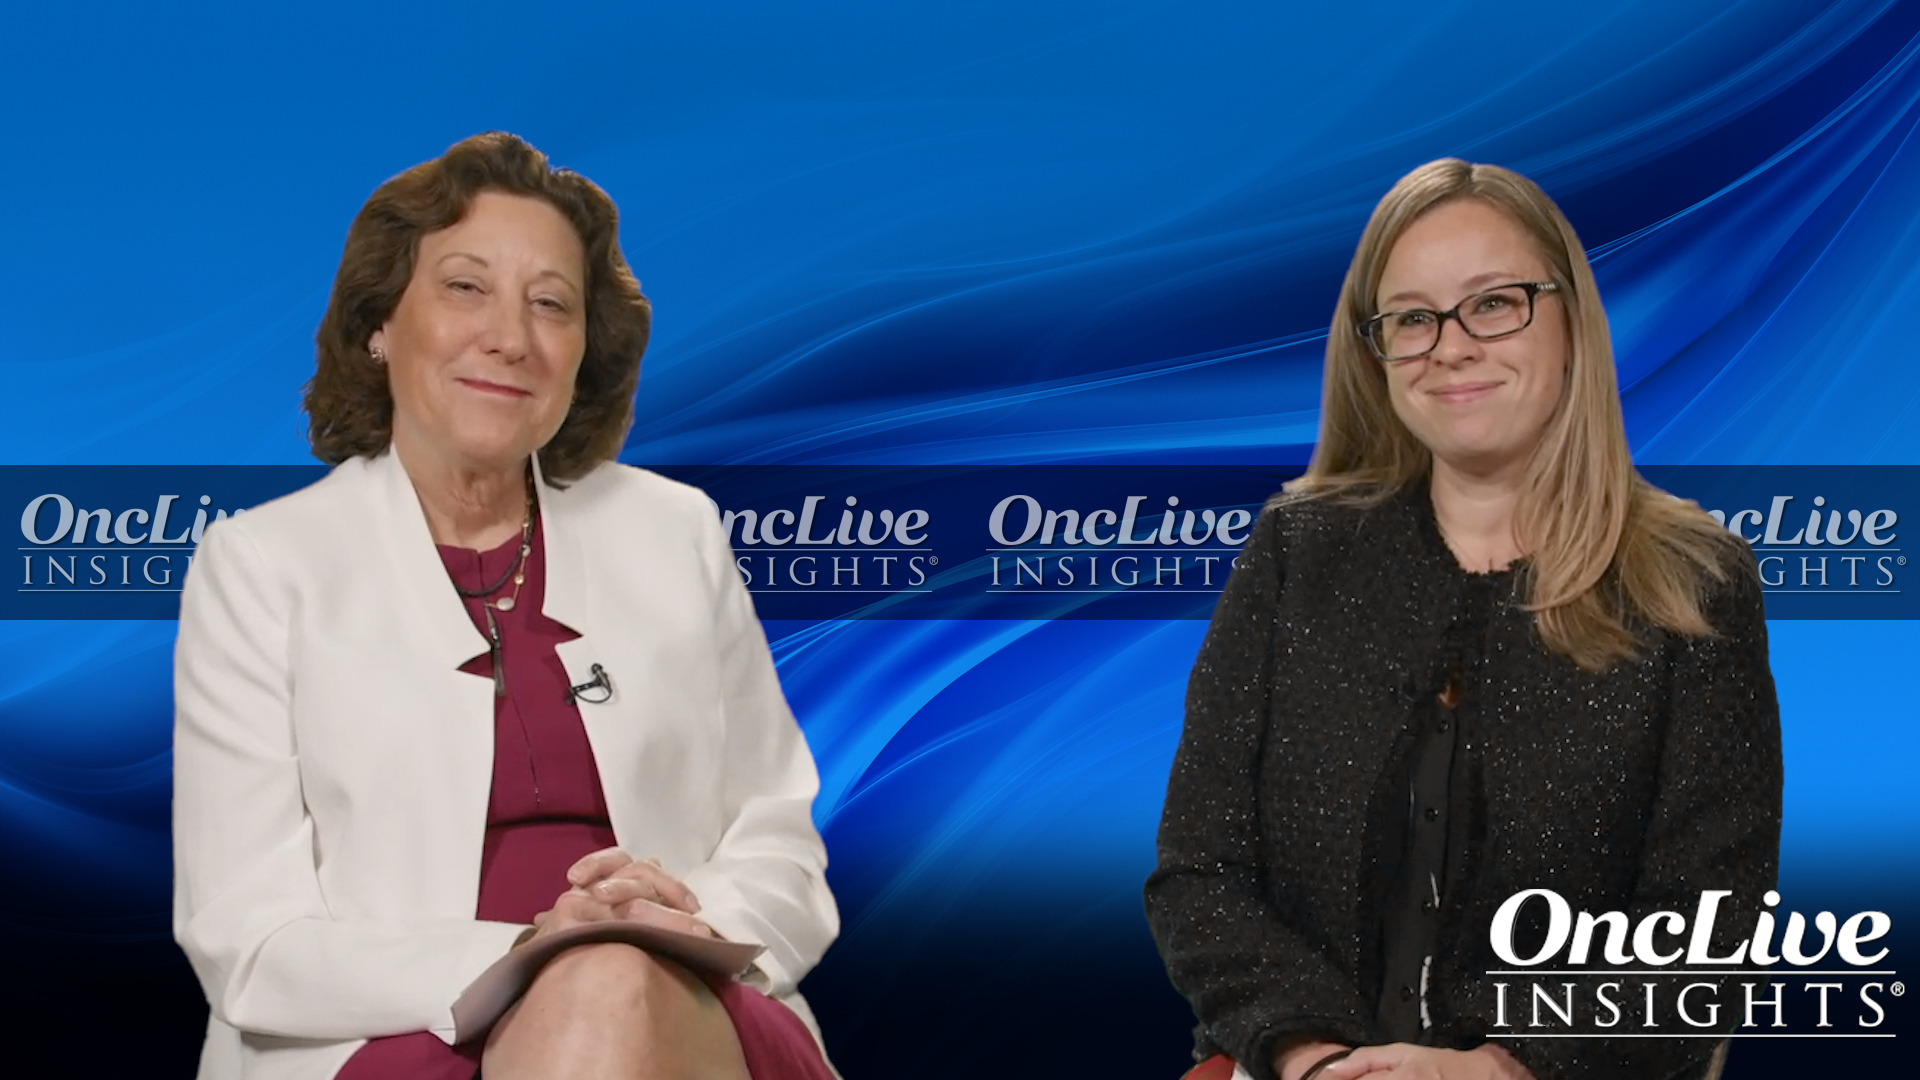 Video 2 - "NCCN Guidelines vs Real-World Practice: Risk Stratifying HR+/HER2- Early Breast Cancer"